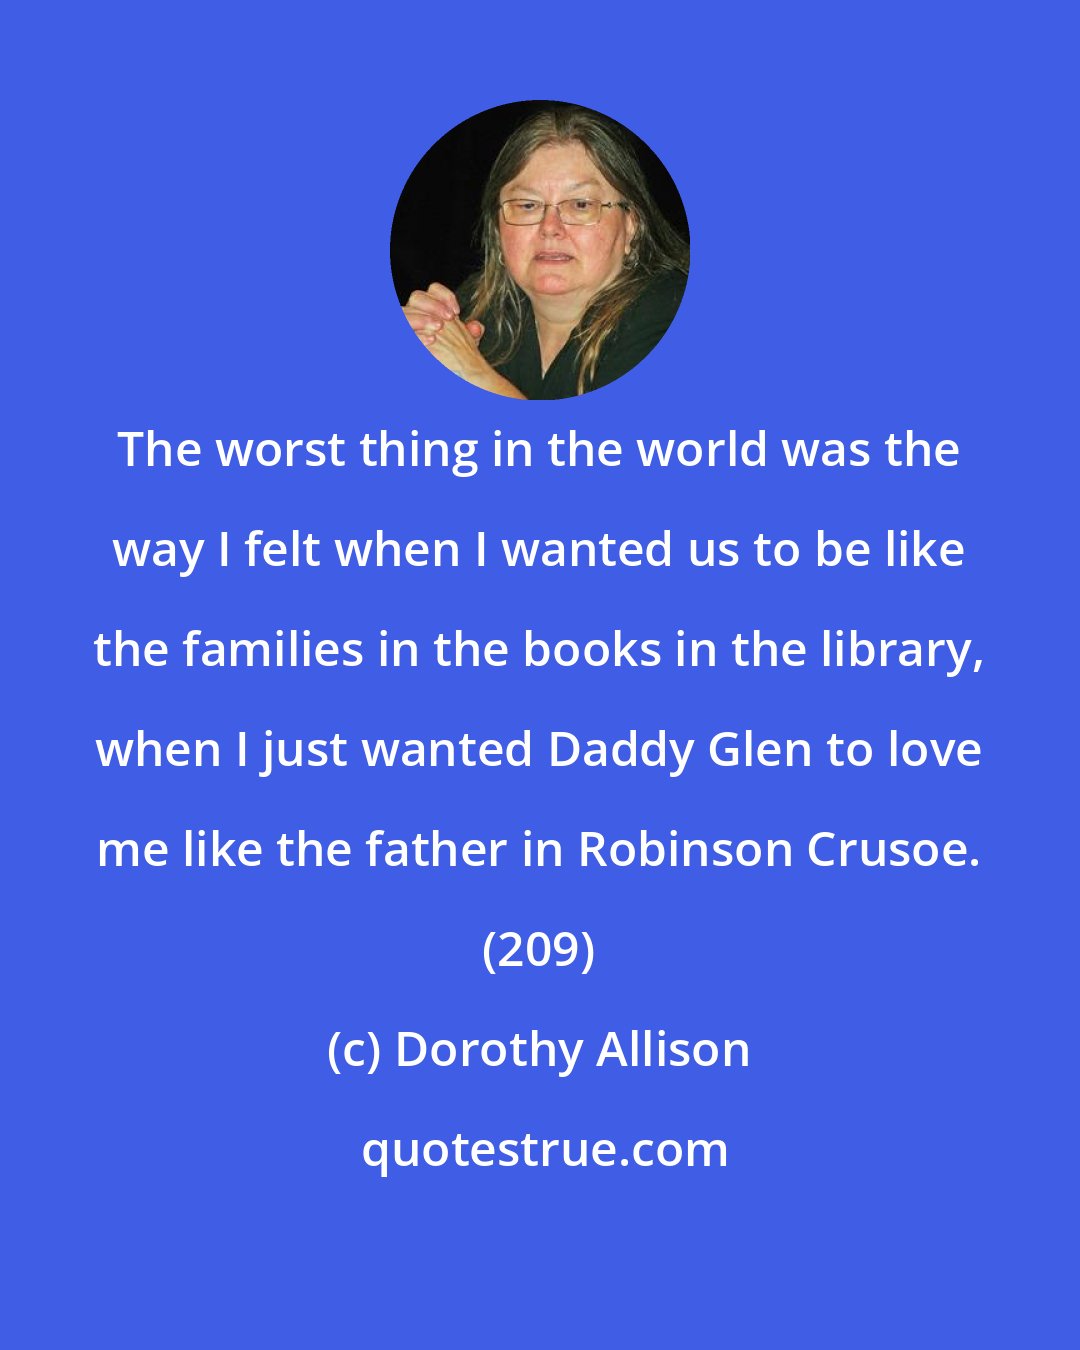 Dorothy Allison: The worst thing in the world was the way I felt when I wanted us to be like the families in the books in the library, when I just wanted Daddy Glen to love me like the father in Robinson Crusoe. (209)